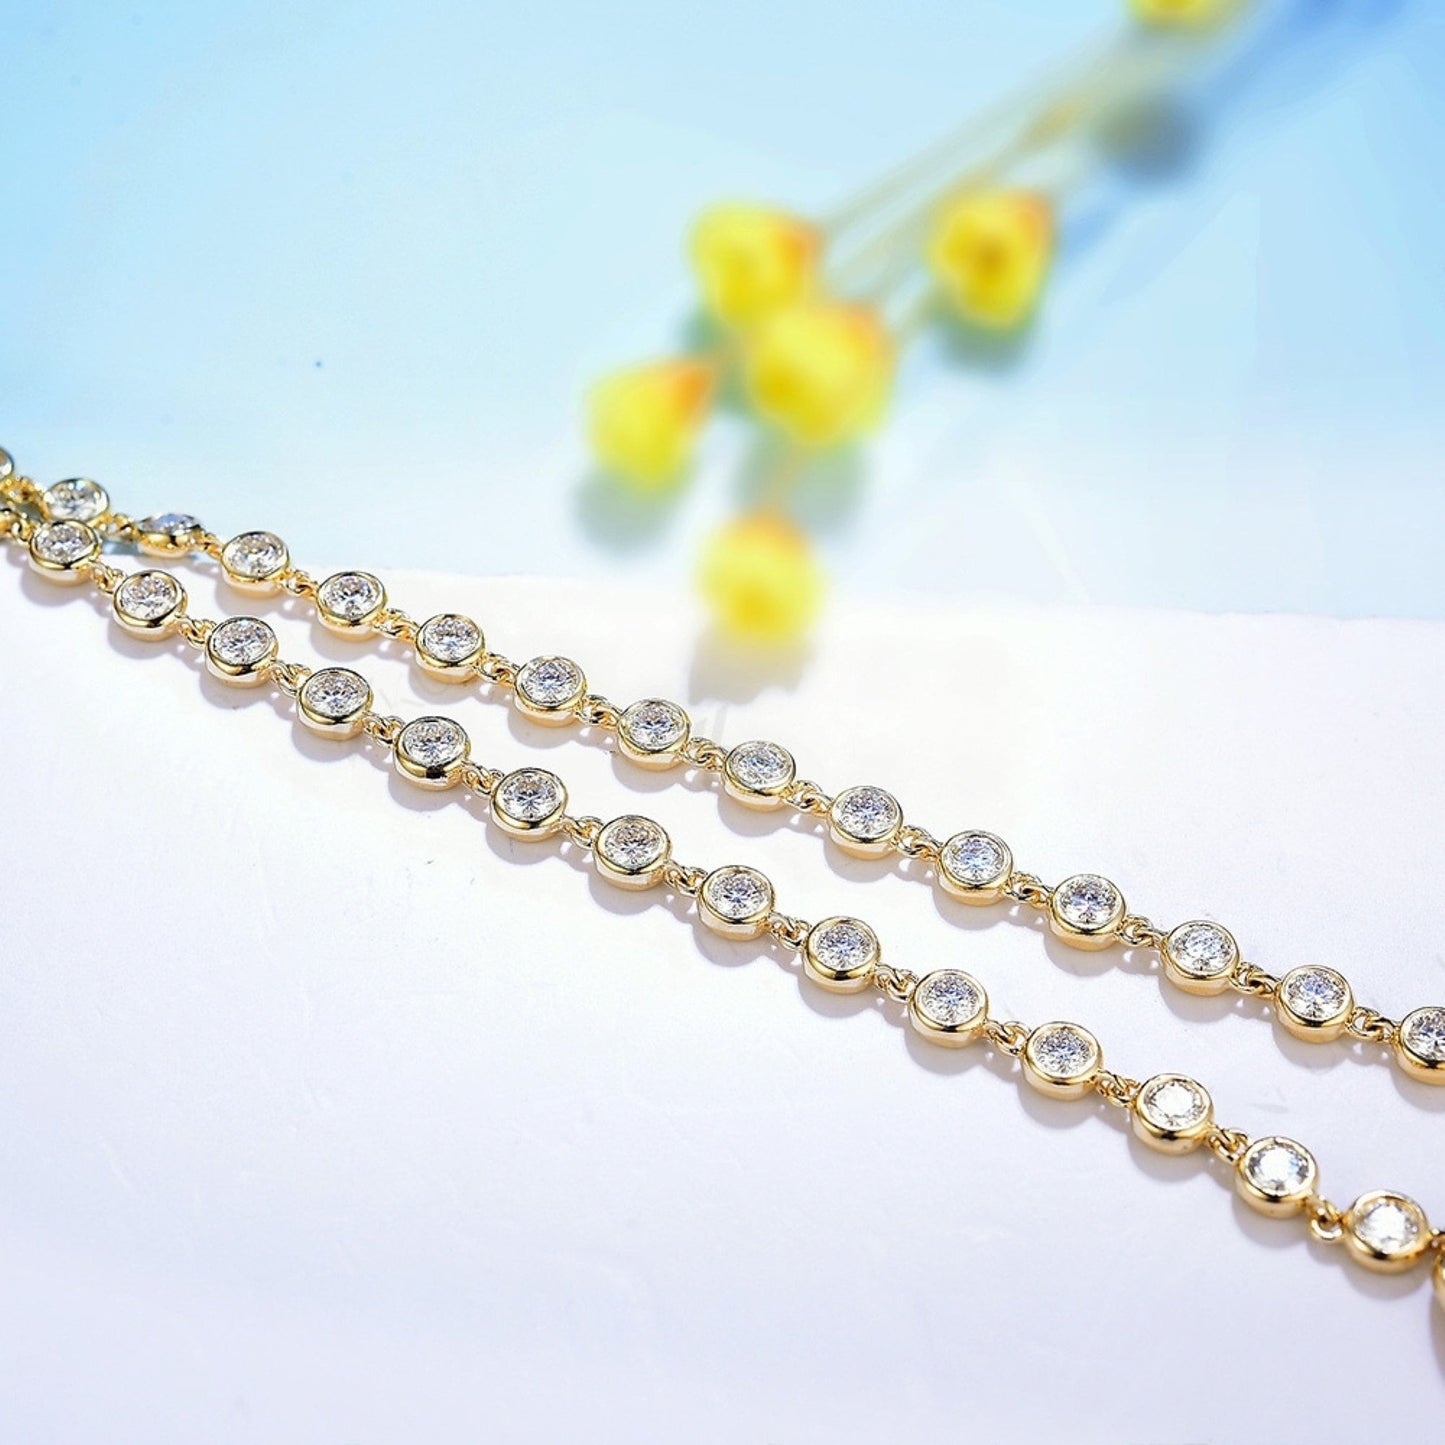 Solid Gold/Silver Moissanite Necklace, Chain Necklace